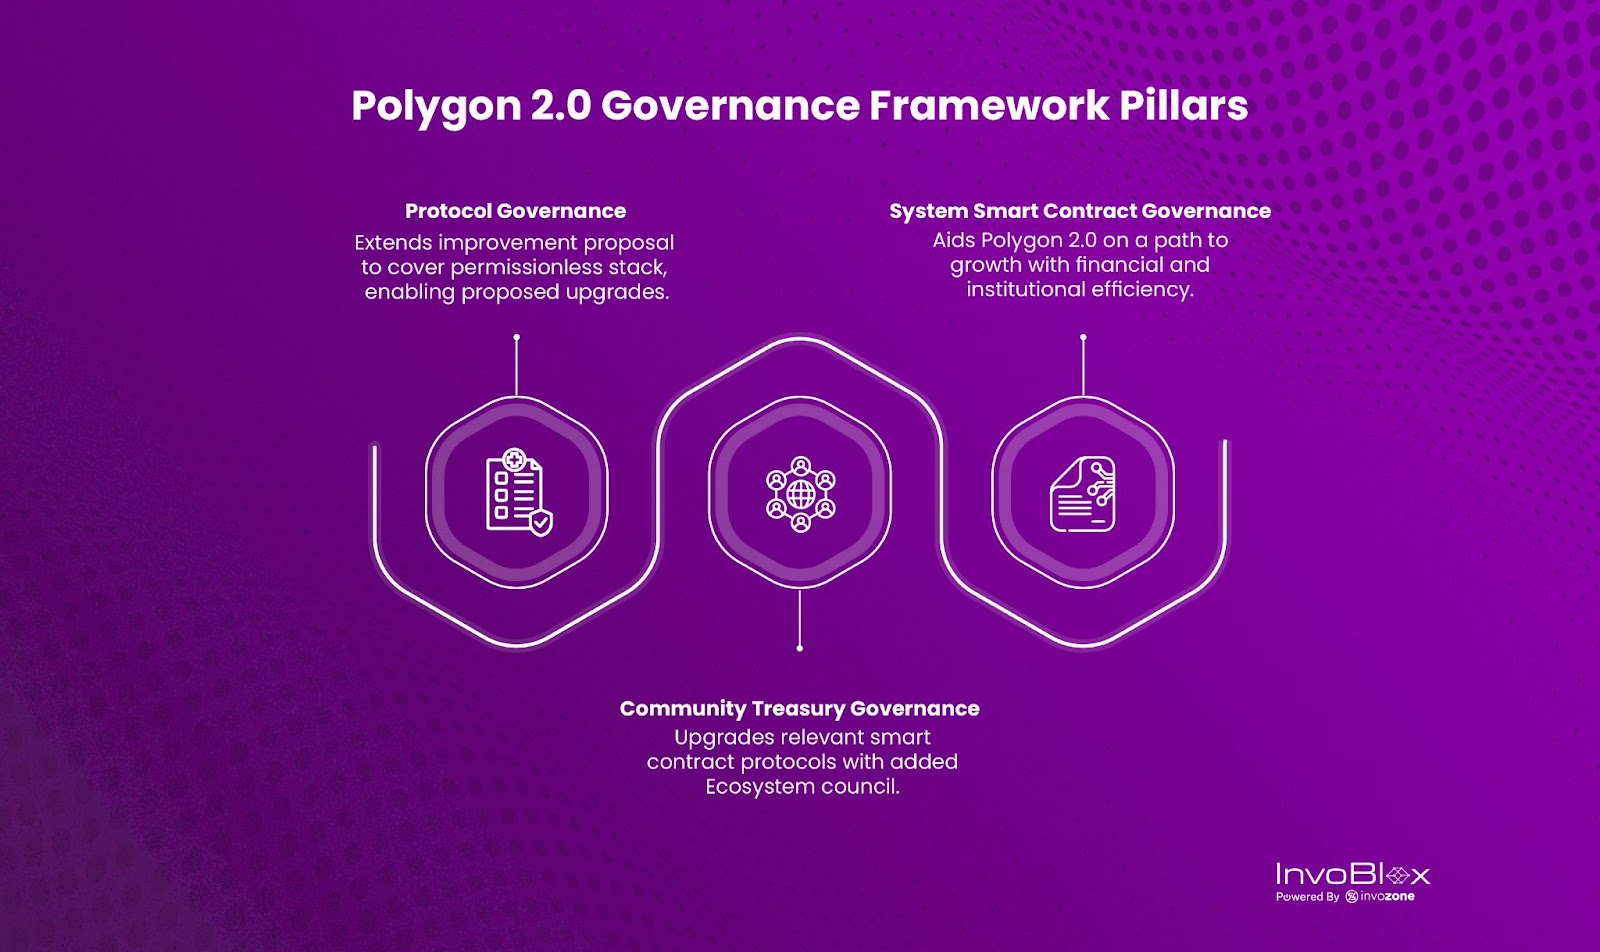 The governance framework of Polygon 2.0 can be divided into three pillars: